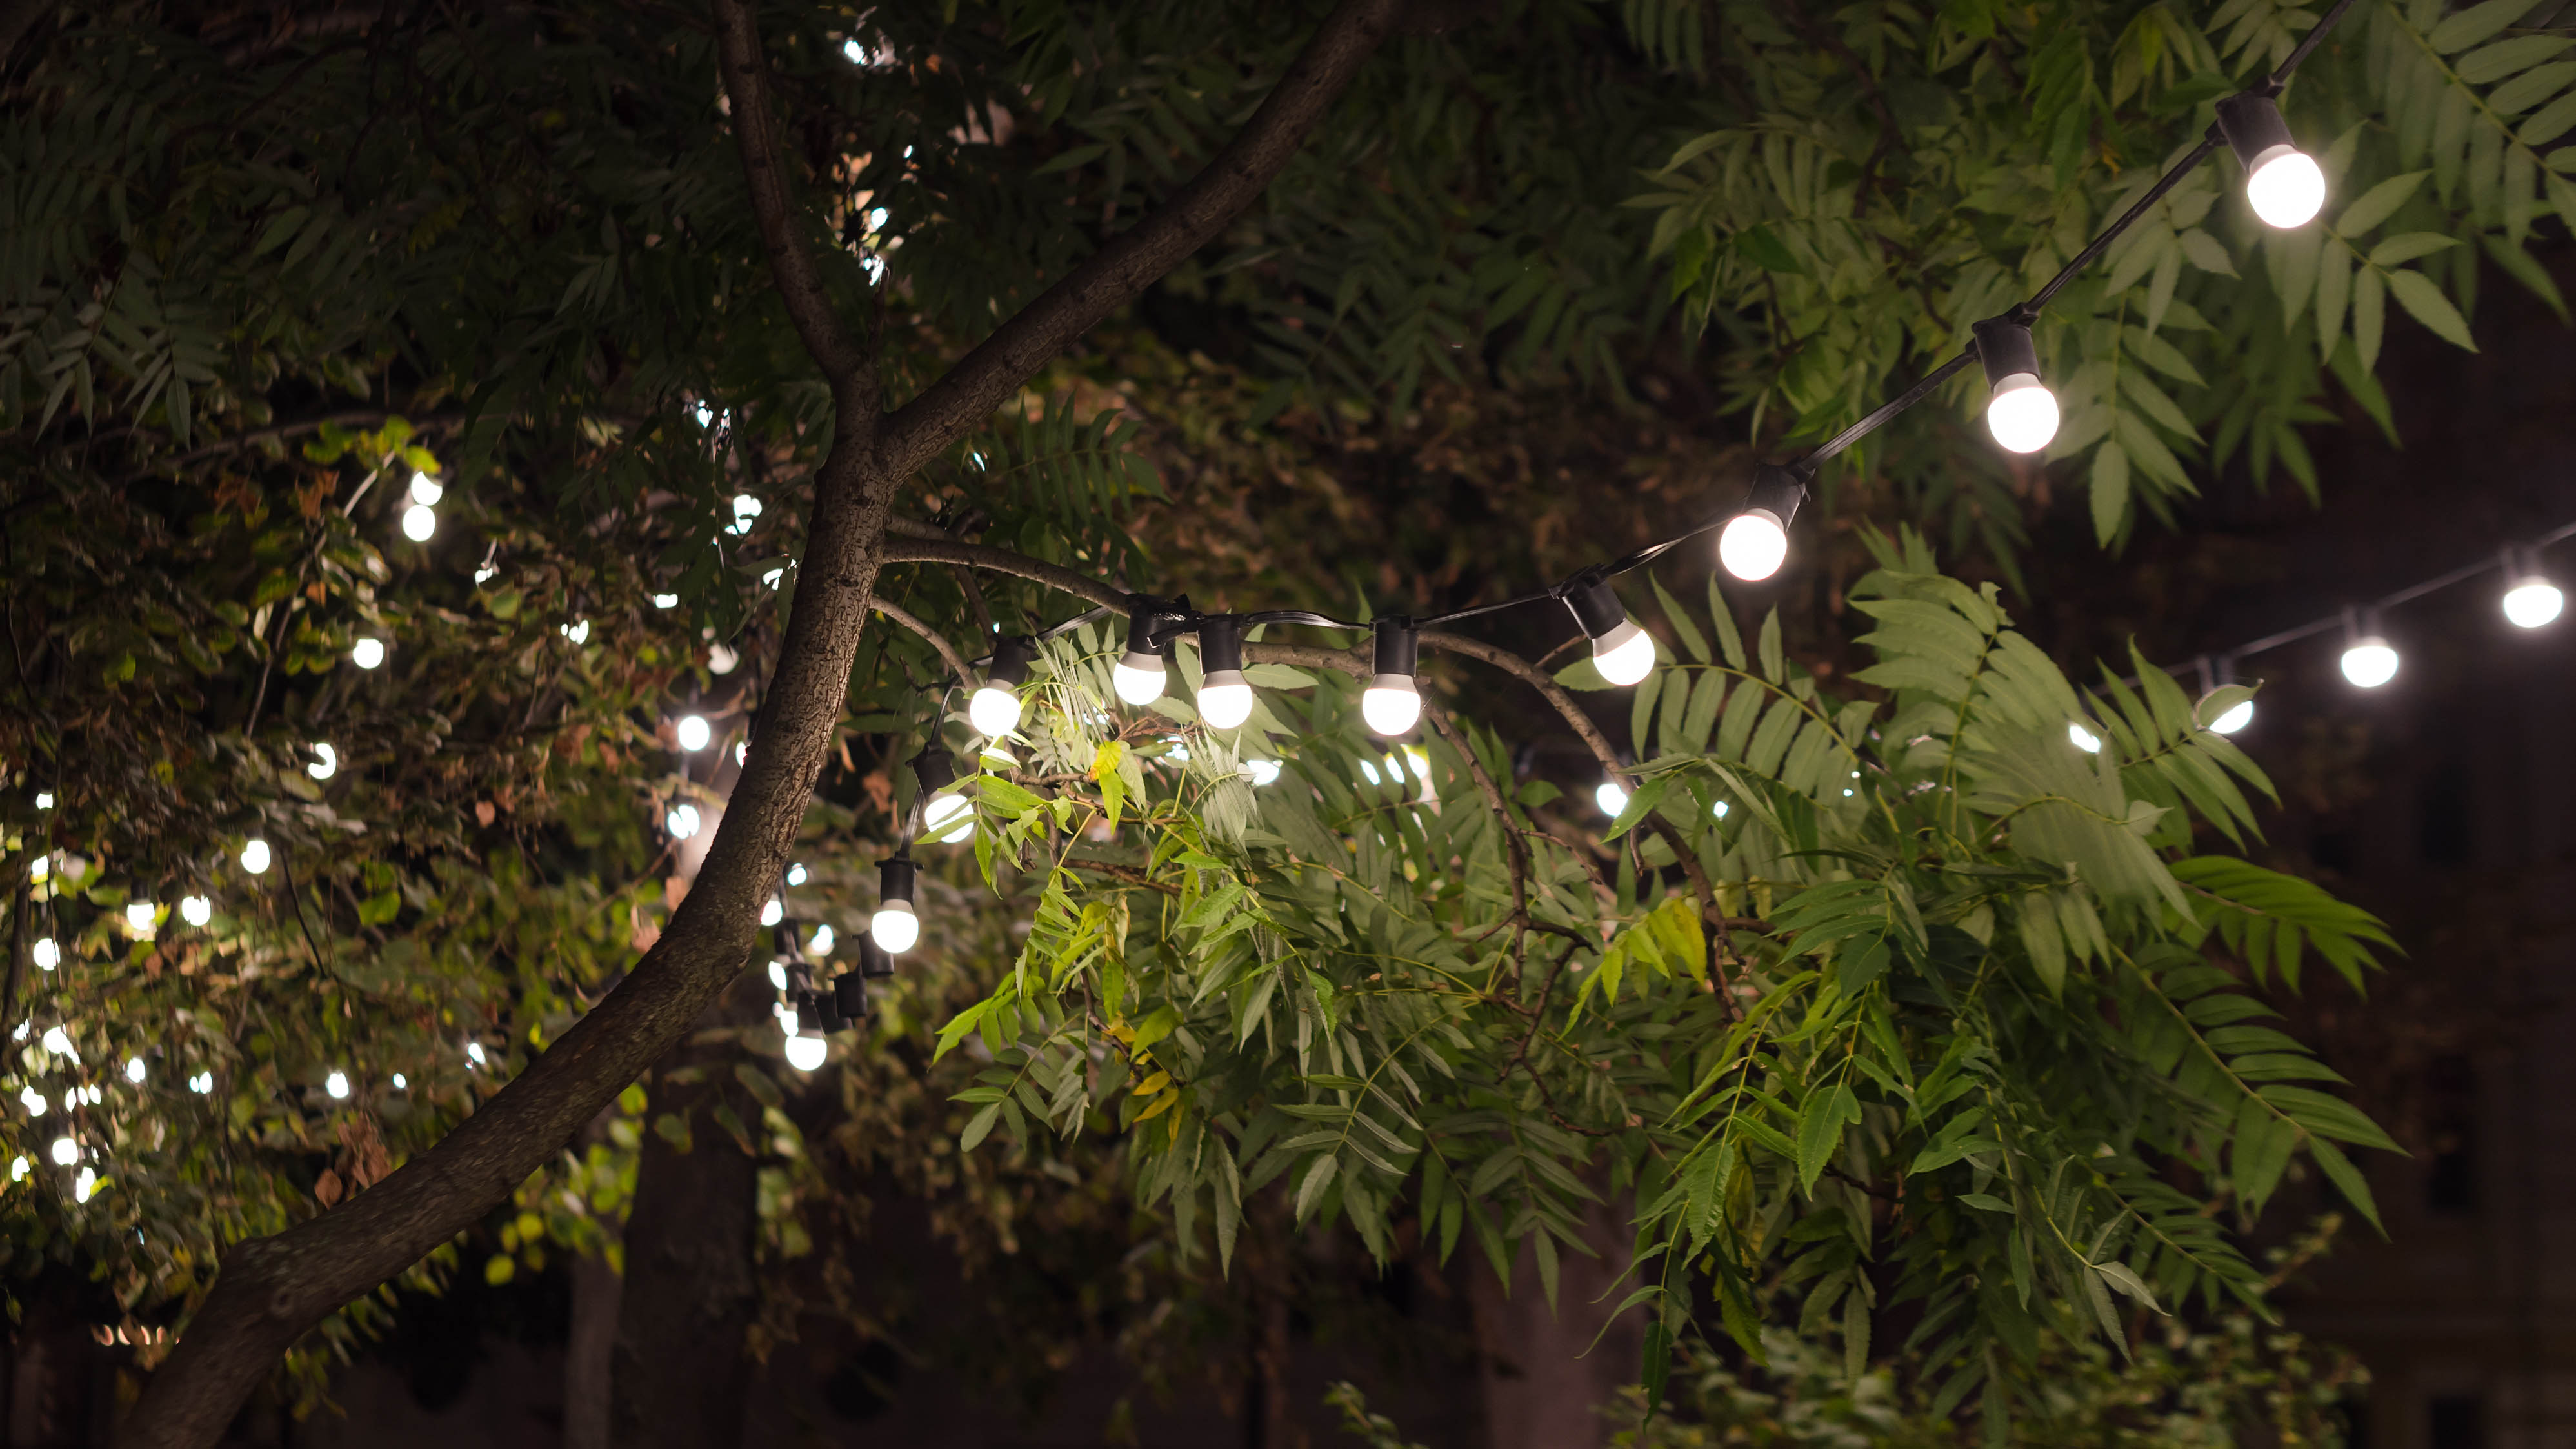 How to best place solar lights: Solar string lights